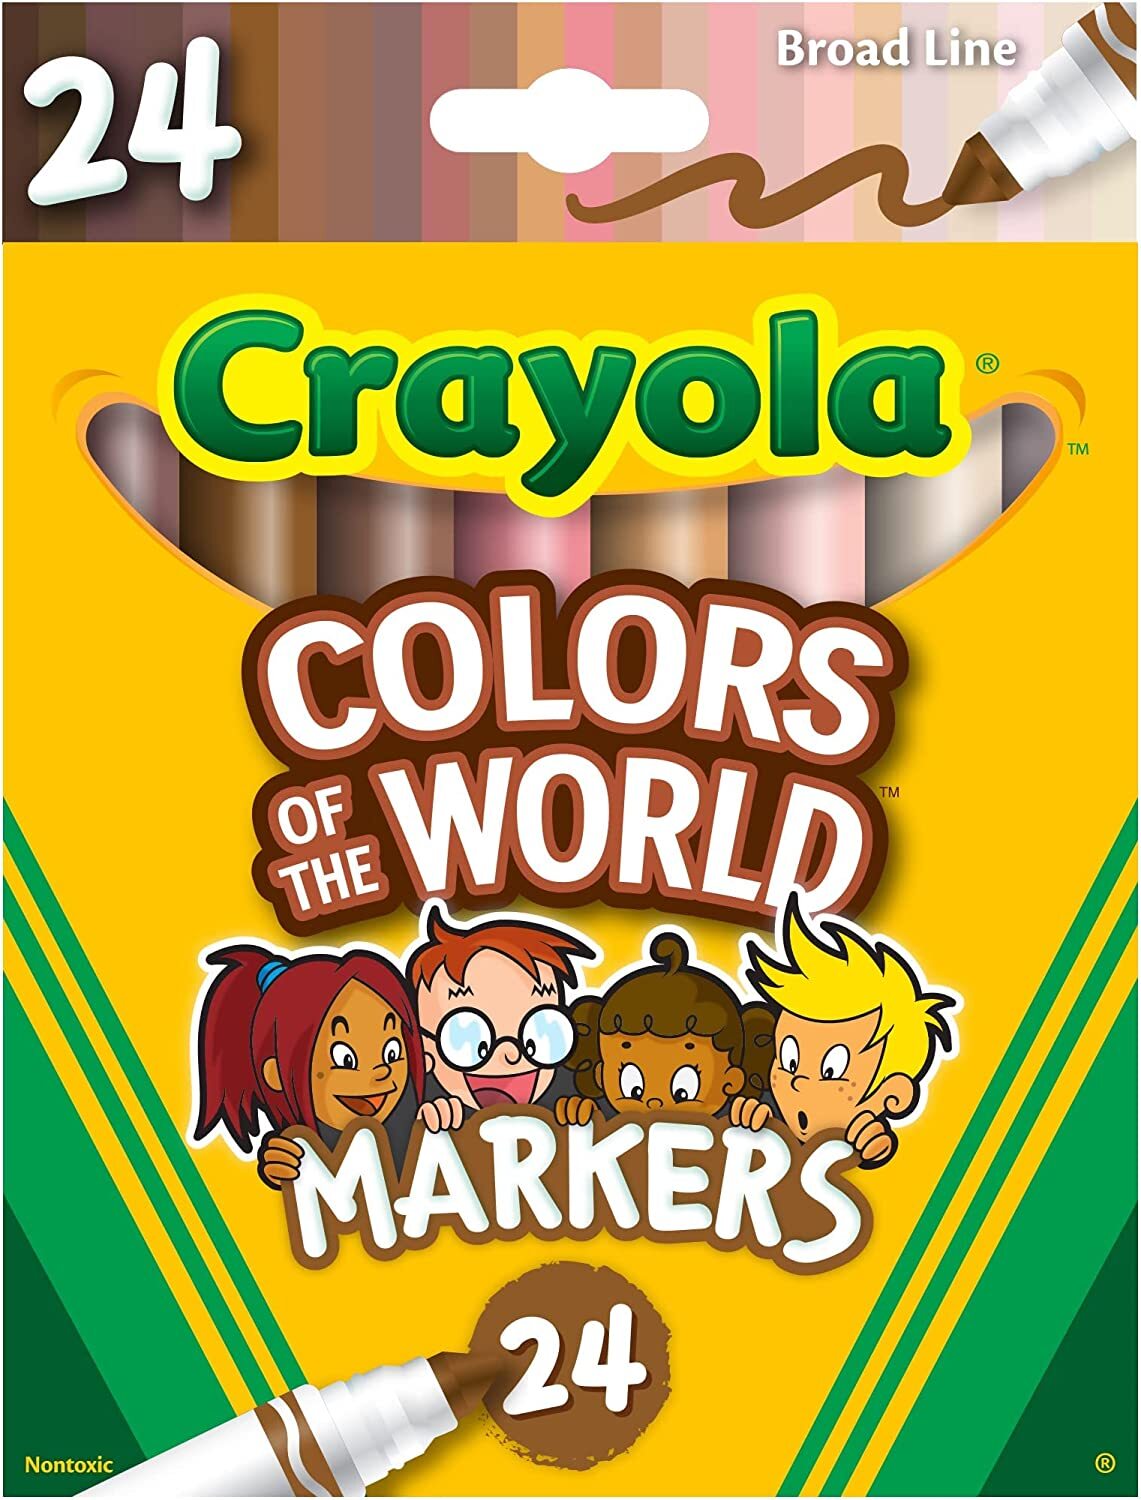 Crayola: Colors of the World Markers (24 pack)